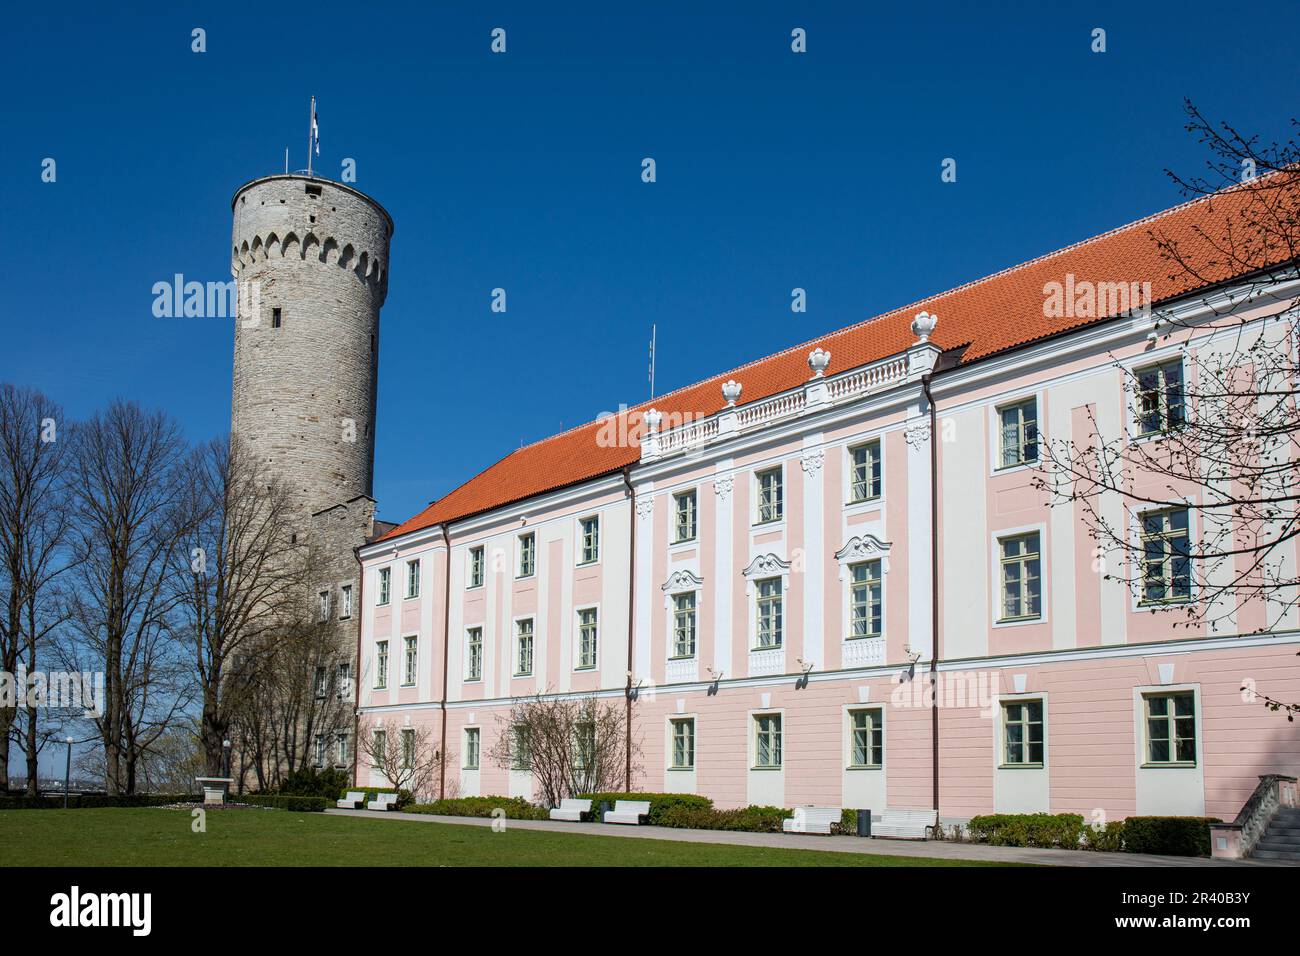 Pika Hermanni torn and parliament building against clear blue sky on a sunny spring day in Vanalinn, the old town of Tallinn, Estonia Stock Photo